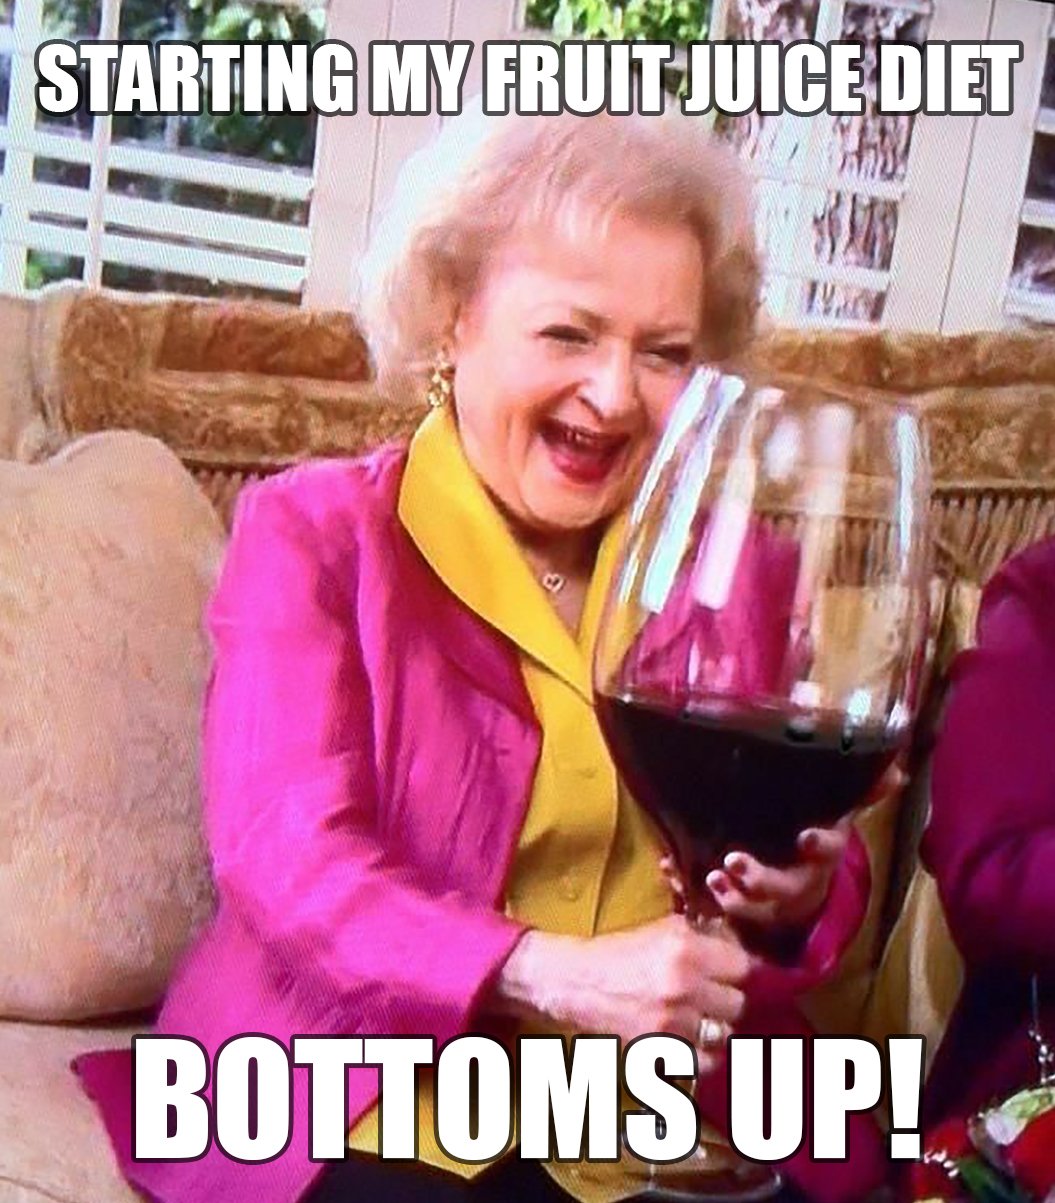 Example of a winememe - Starting my fruit juice diet...bottoms up.